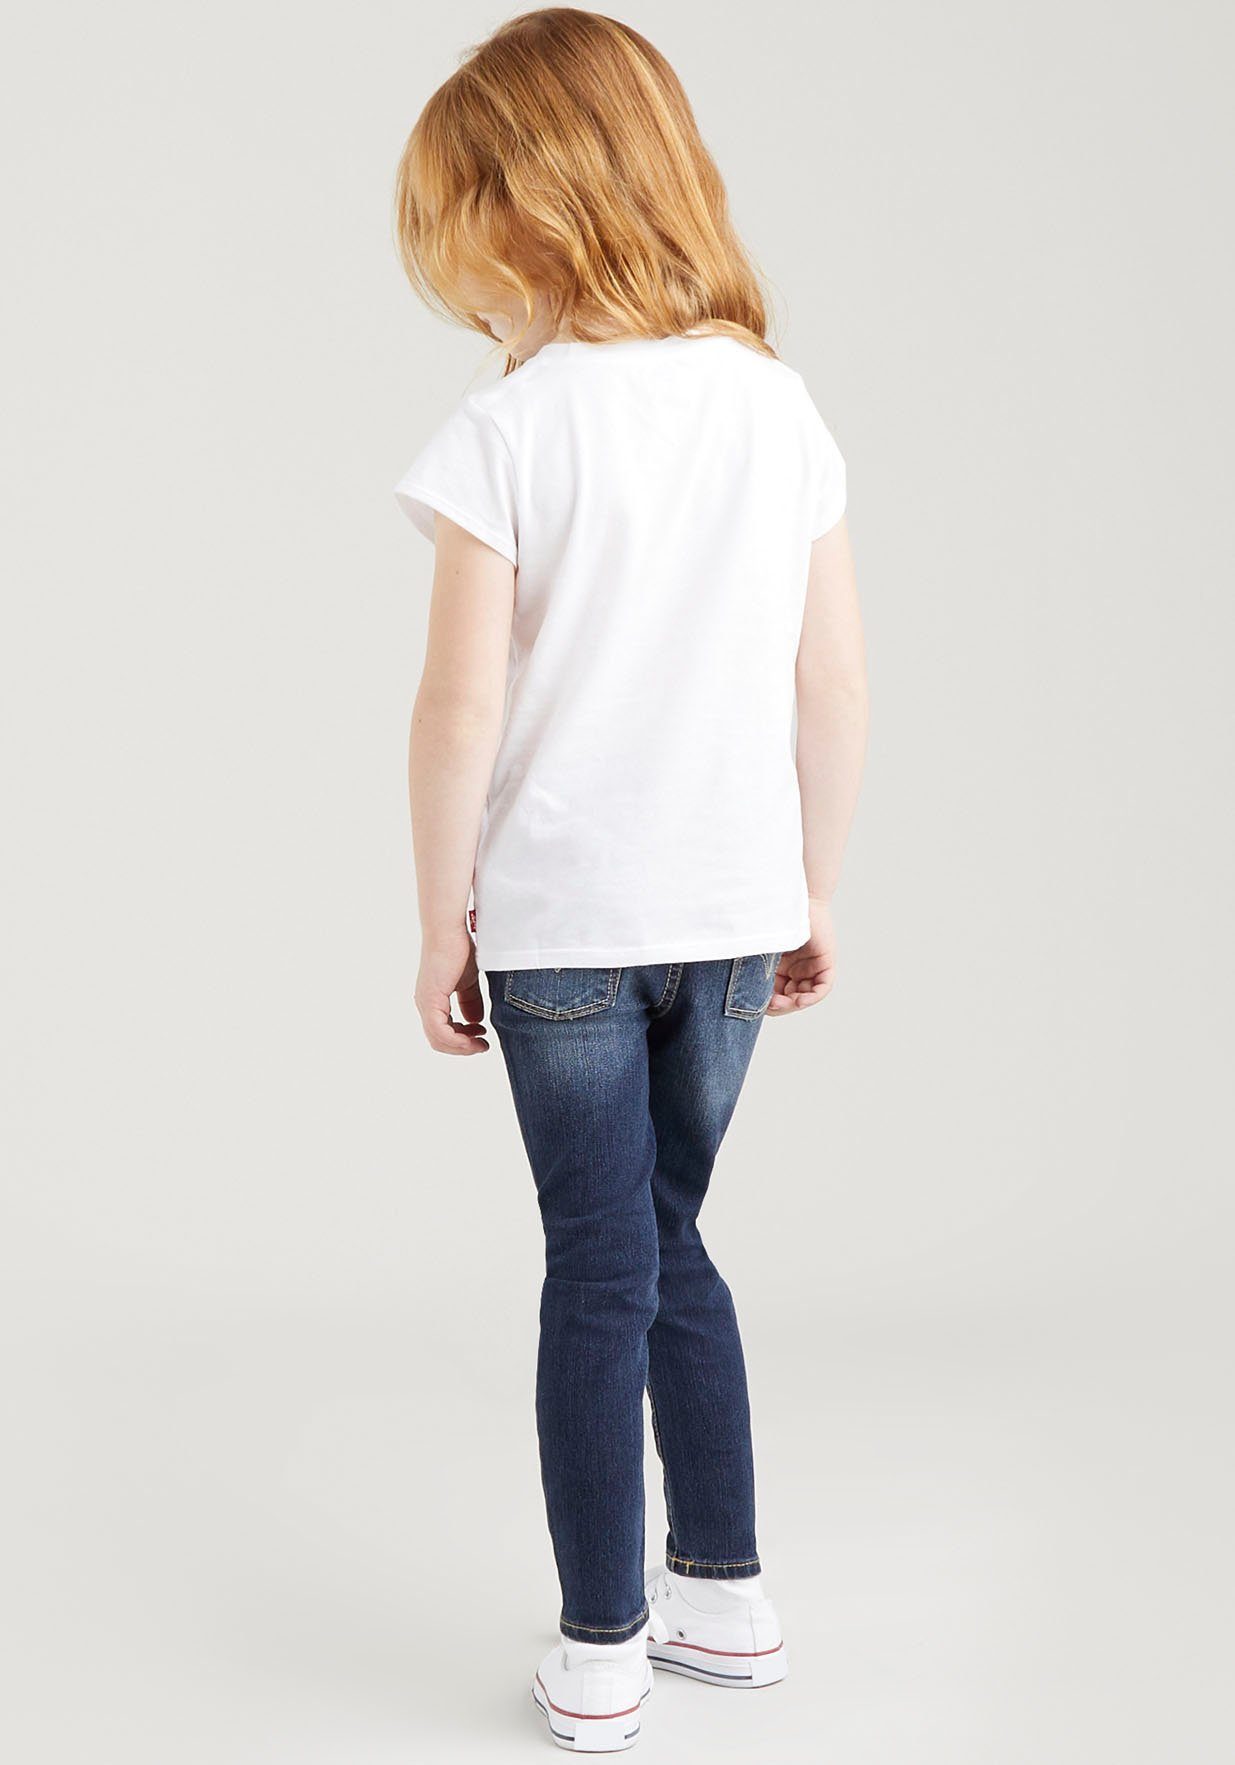 T-Shirt for BATWING S/S Levi's® GIRLS Kids weiß TEE